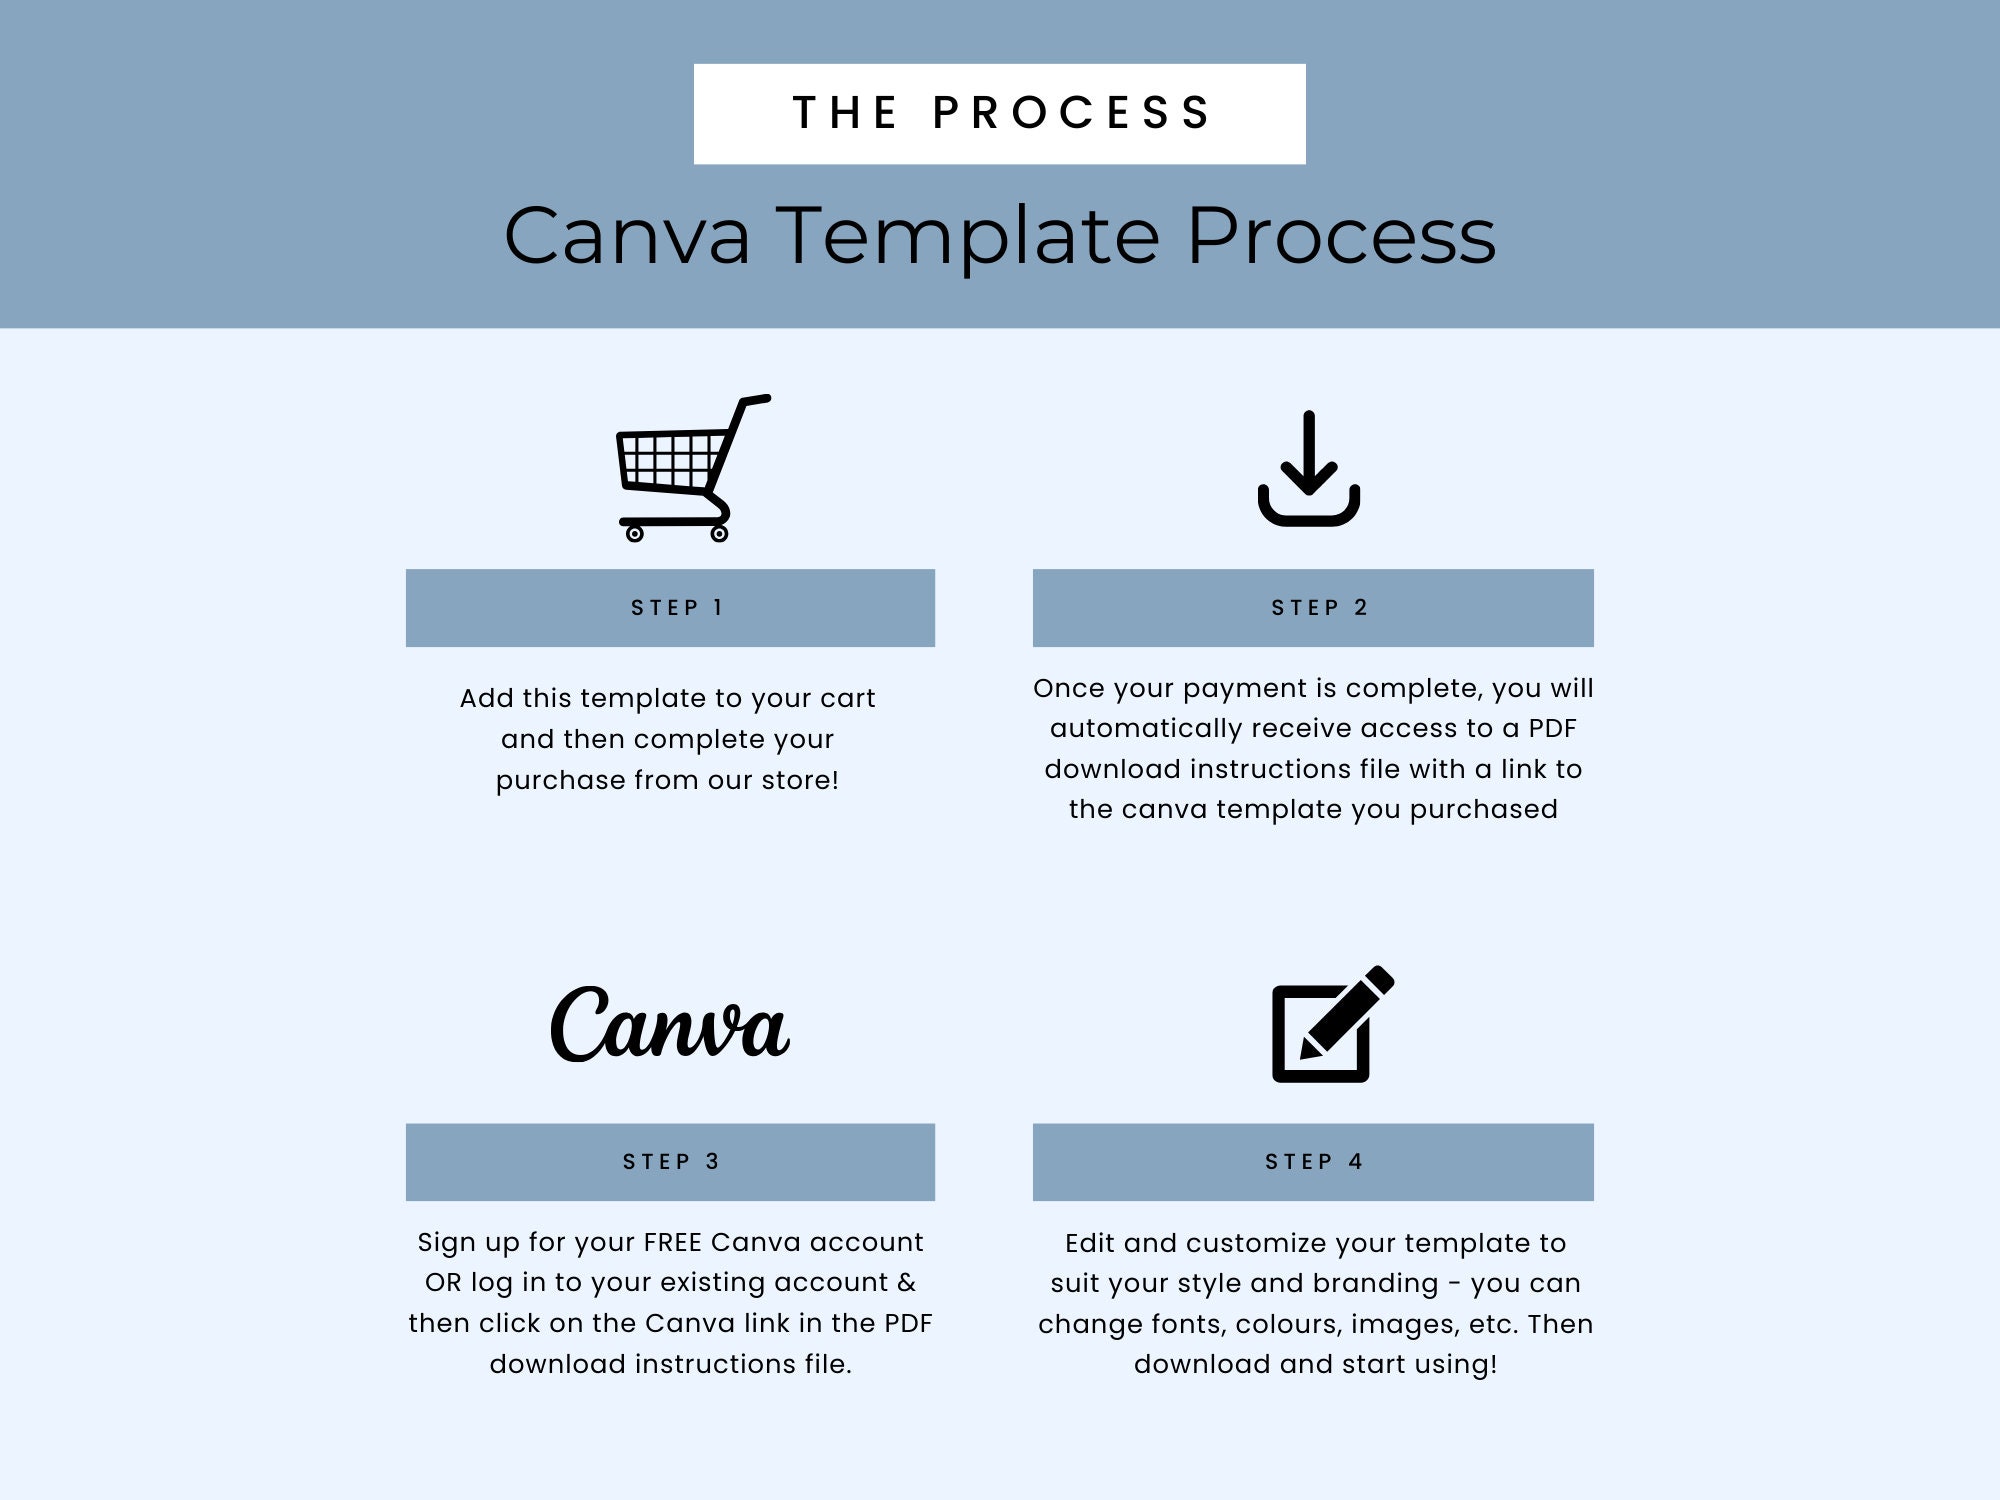 One Page Business Plan Template, Small Business Plan Canva, Starting a ...